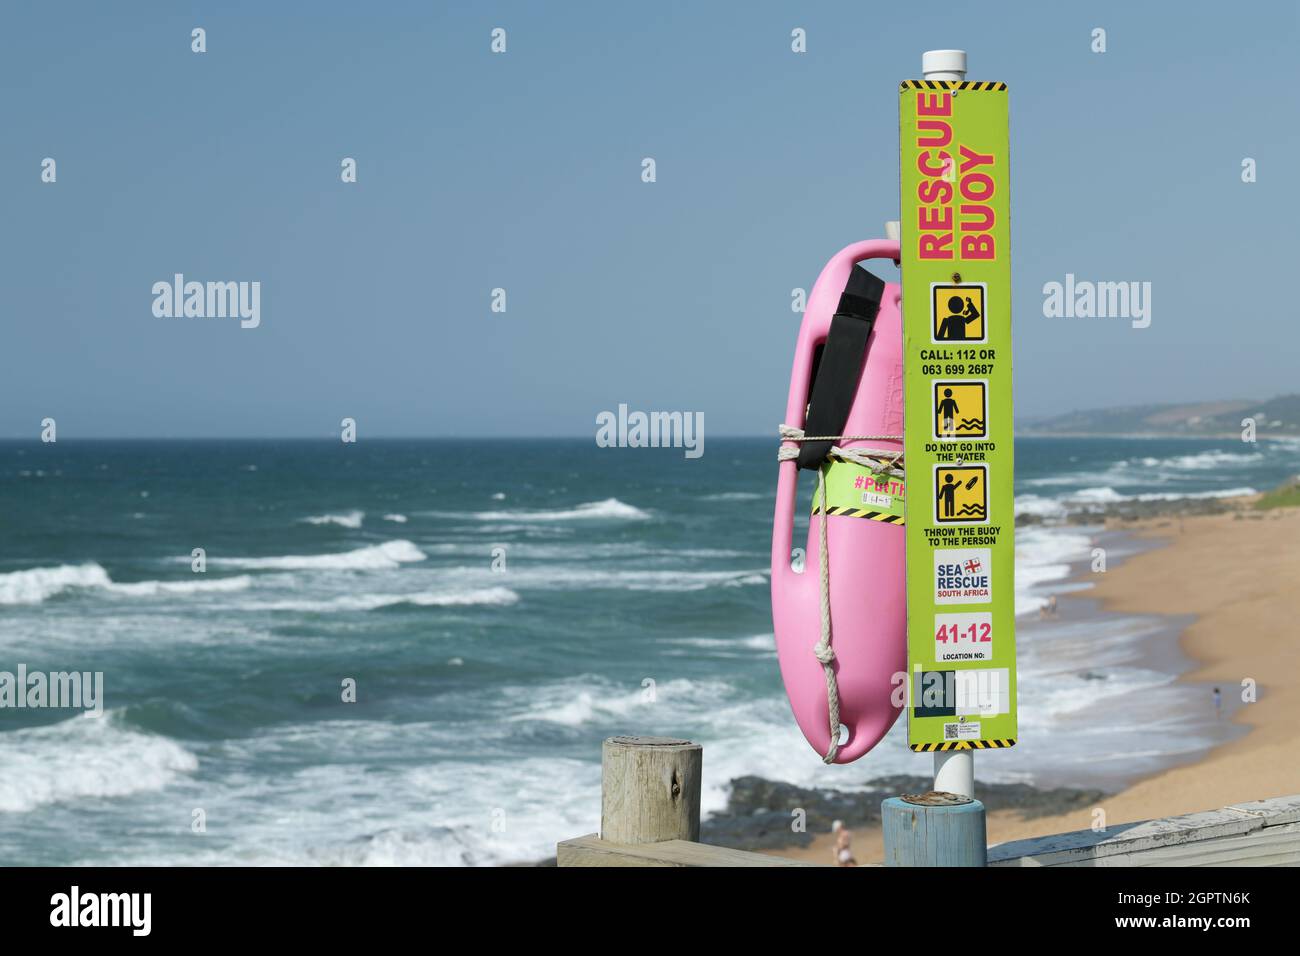 Emergency surf life saving device, rescue buoy, beach, first responder, Durban, South Africa, seaside water safety, illustration, floatation equipment Stock Photo